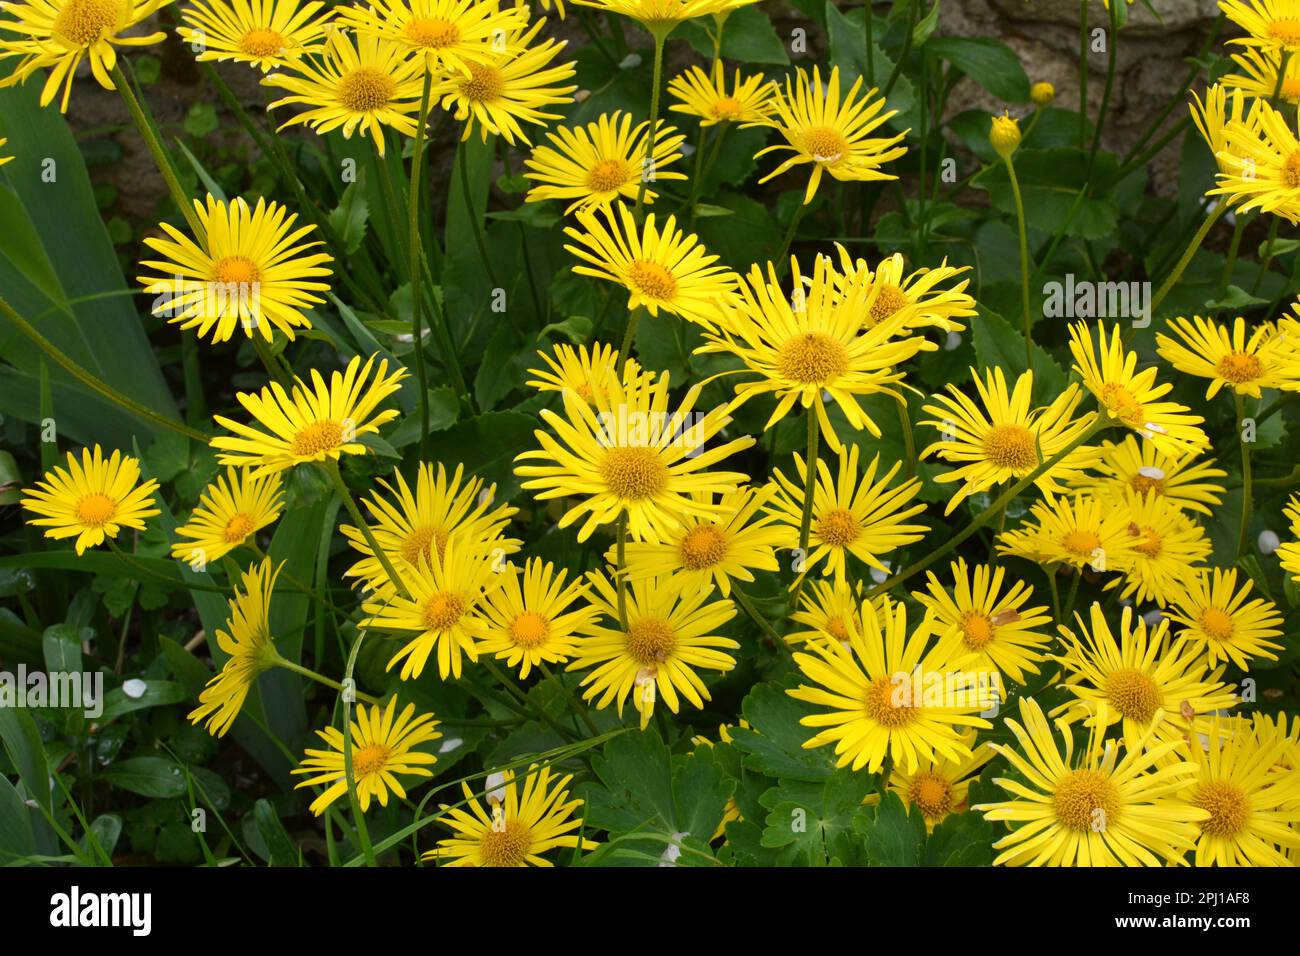 In spring, yellow doronicum chamomile blooms on the flowerbed Stock Photo